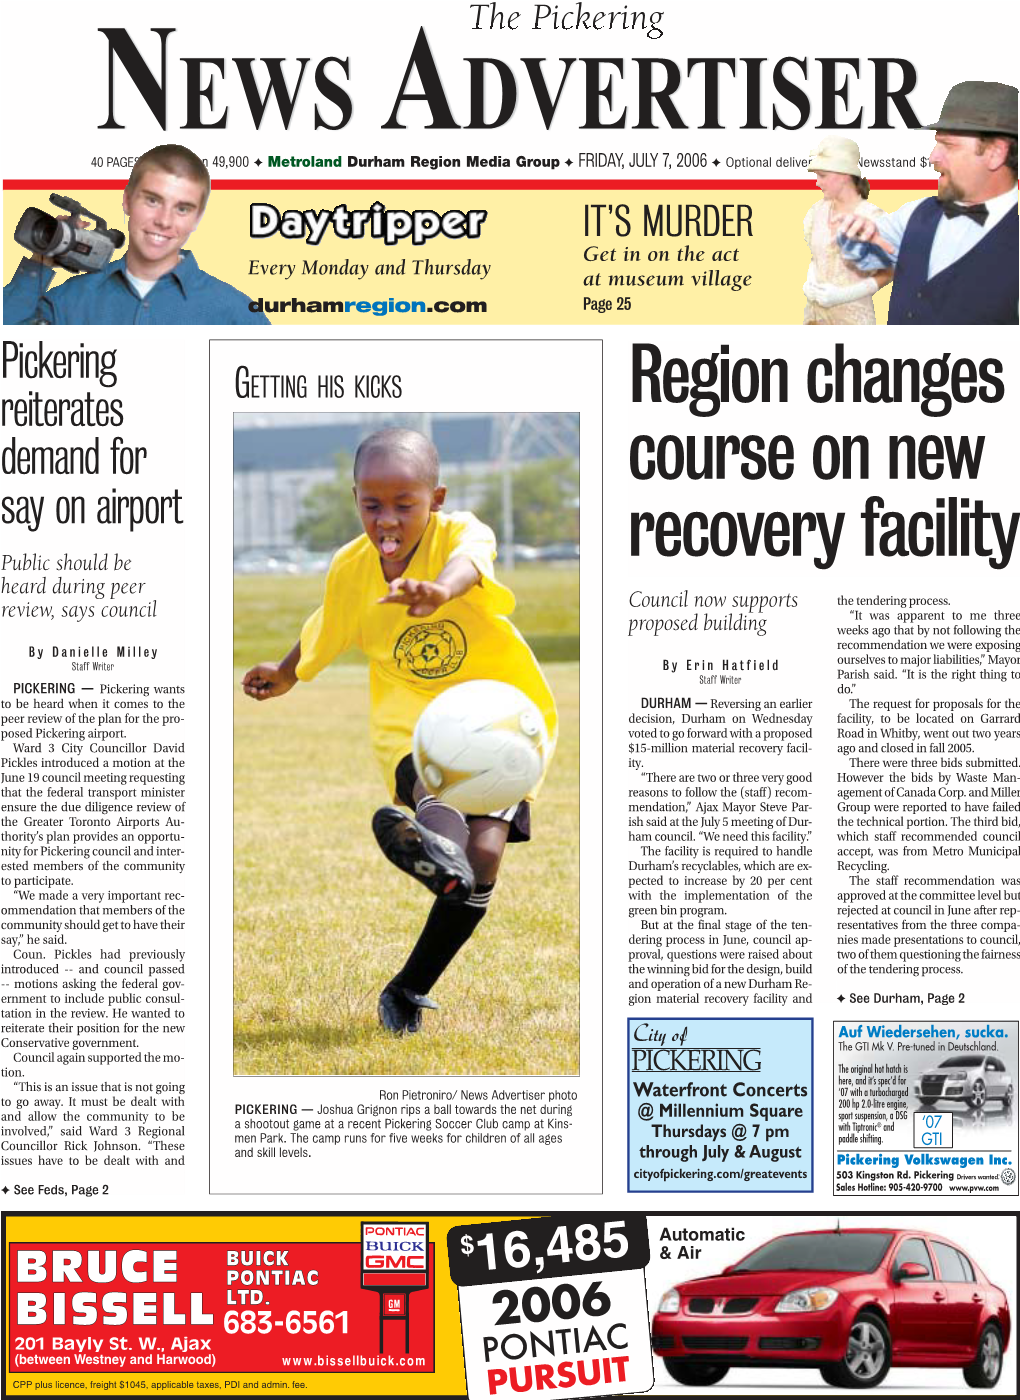 Region Changes Course on New Recovery Facility